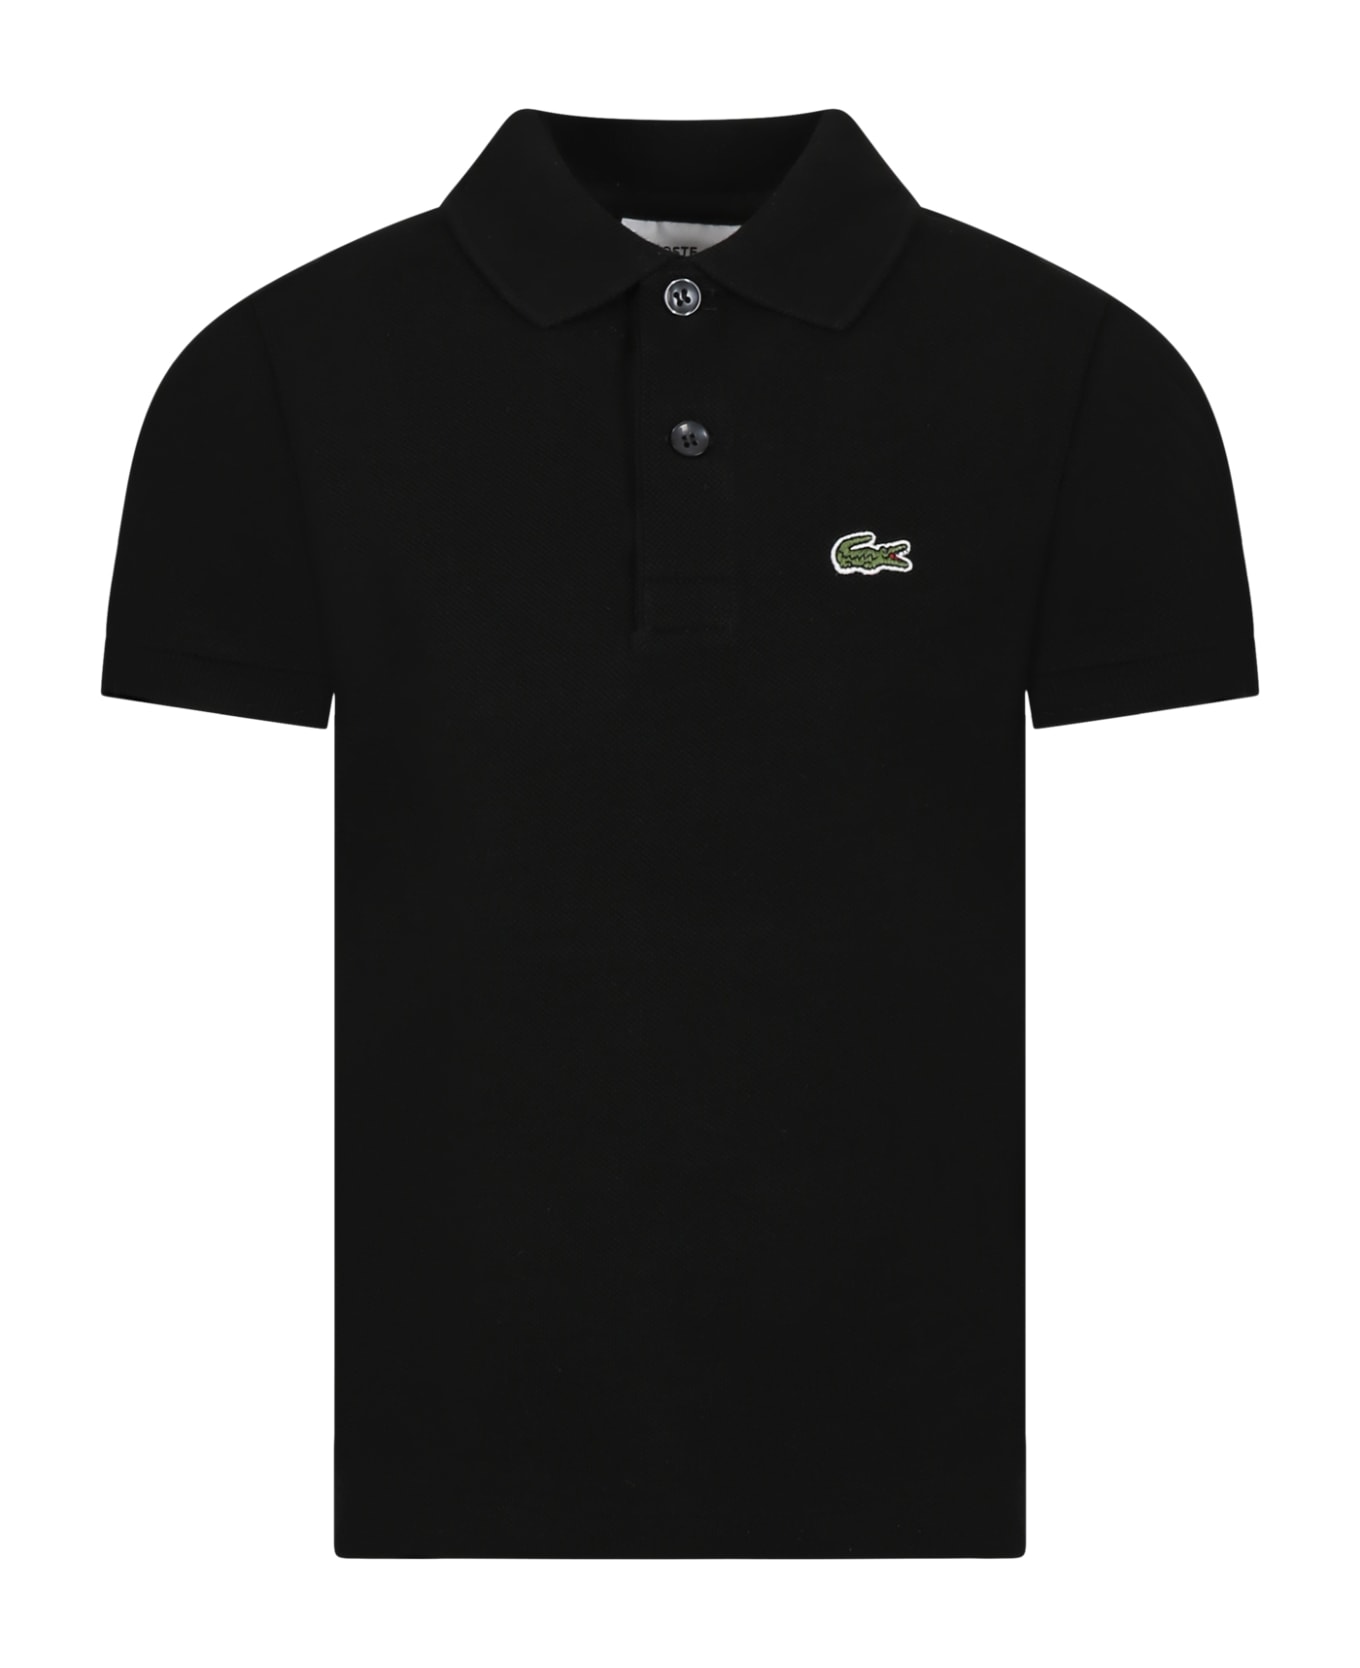 Lacoste Black Polo Shirt For Boy With Green Crocodile - Black